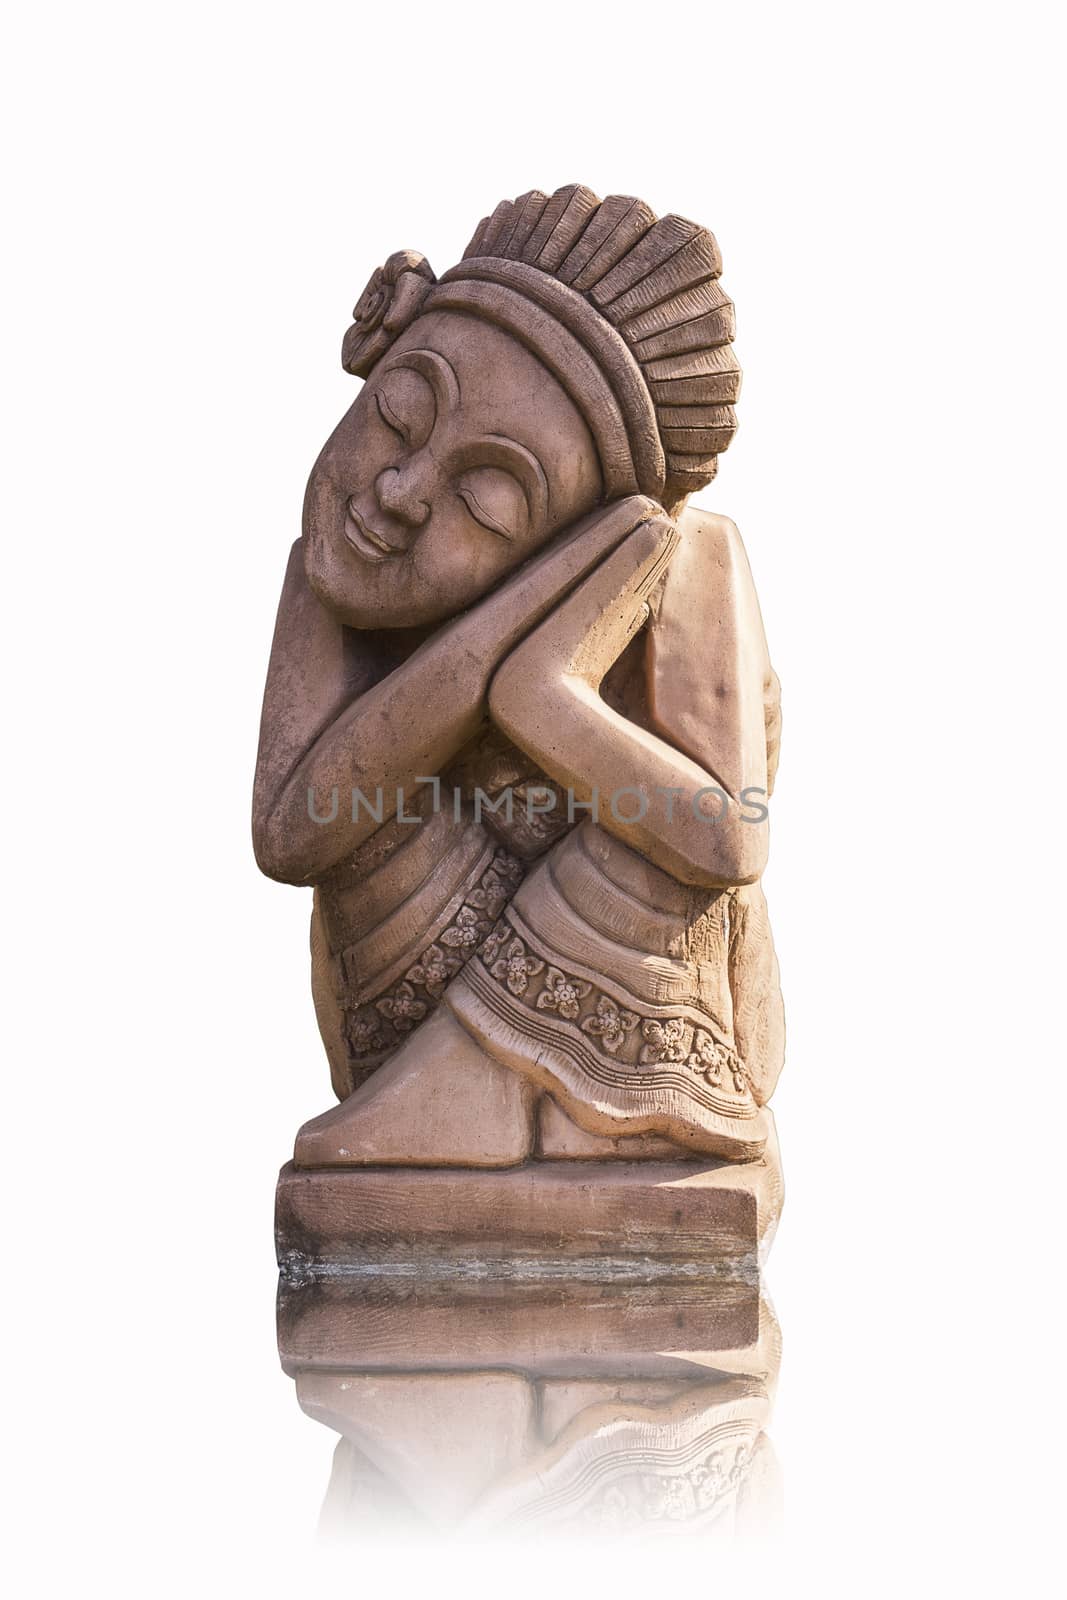 Sand stone woman statue on white background